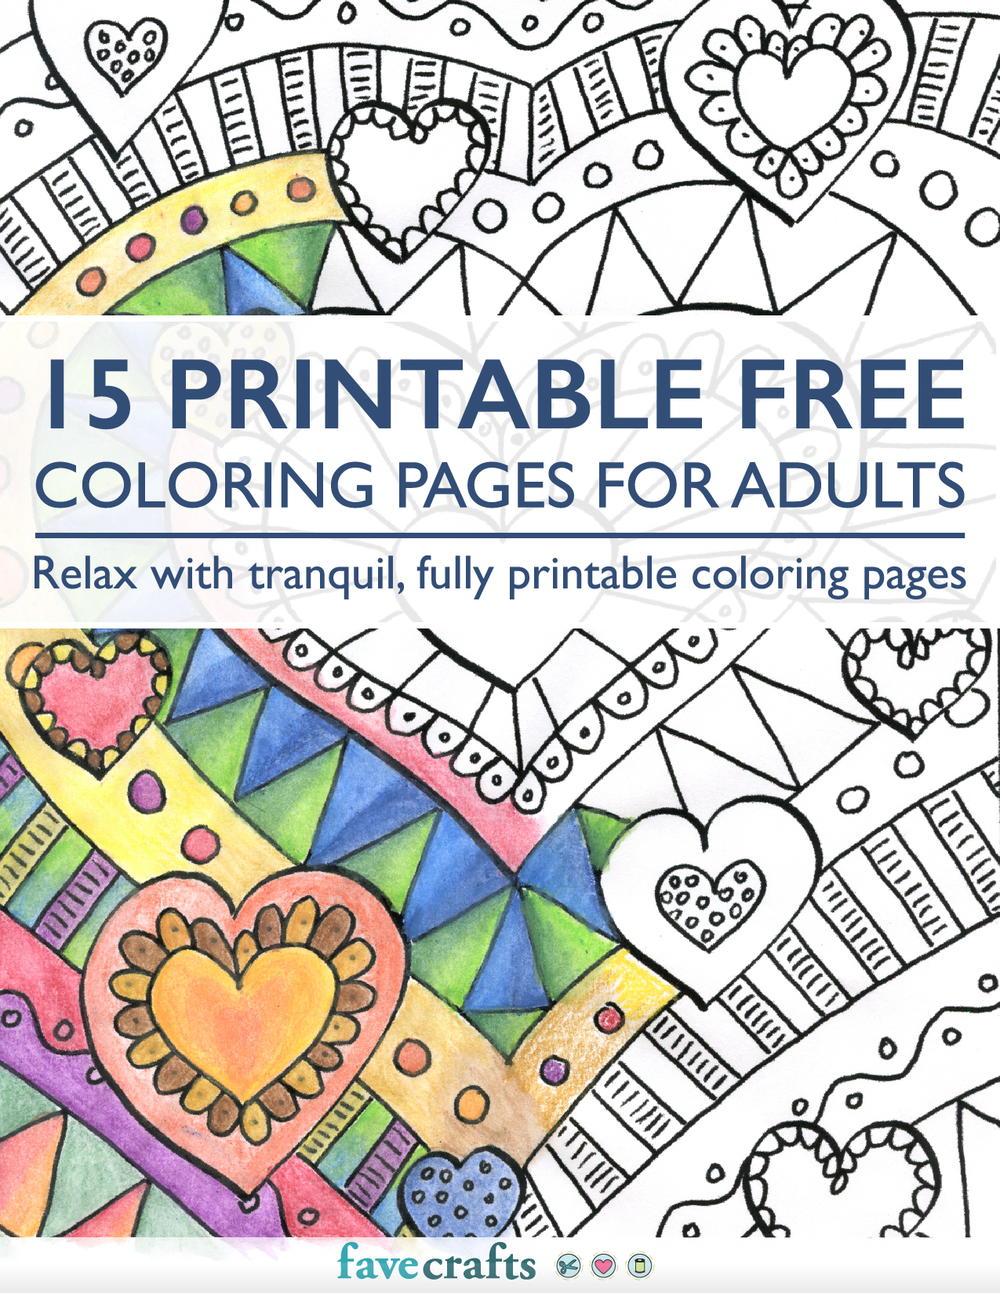 Free Prontable Coloring Pages